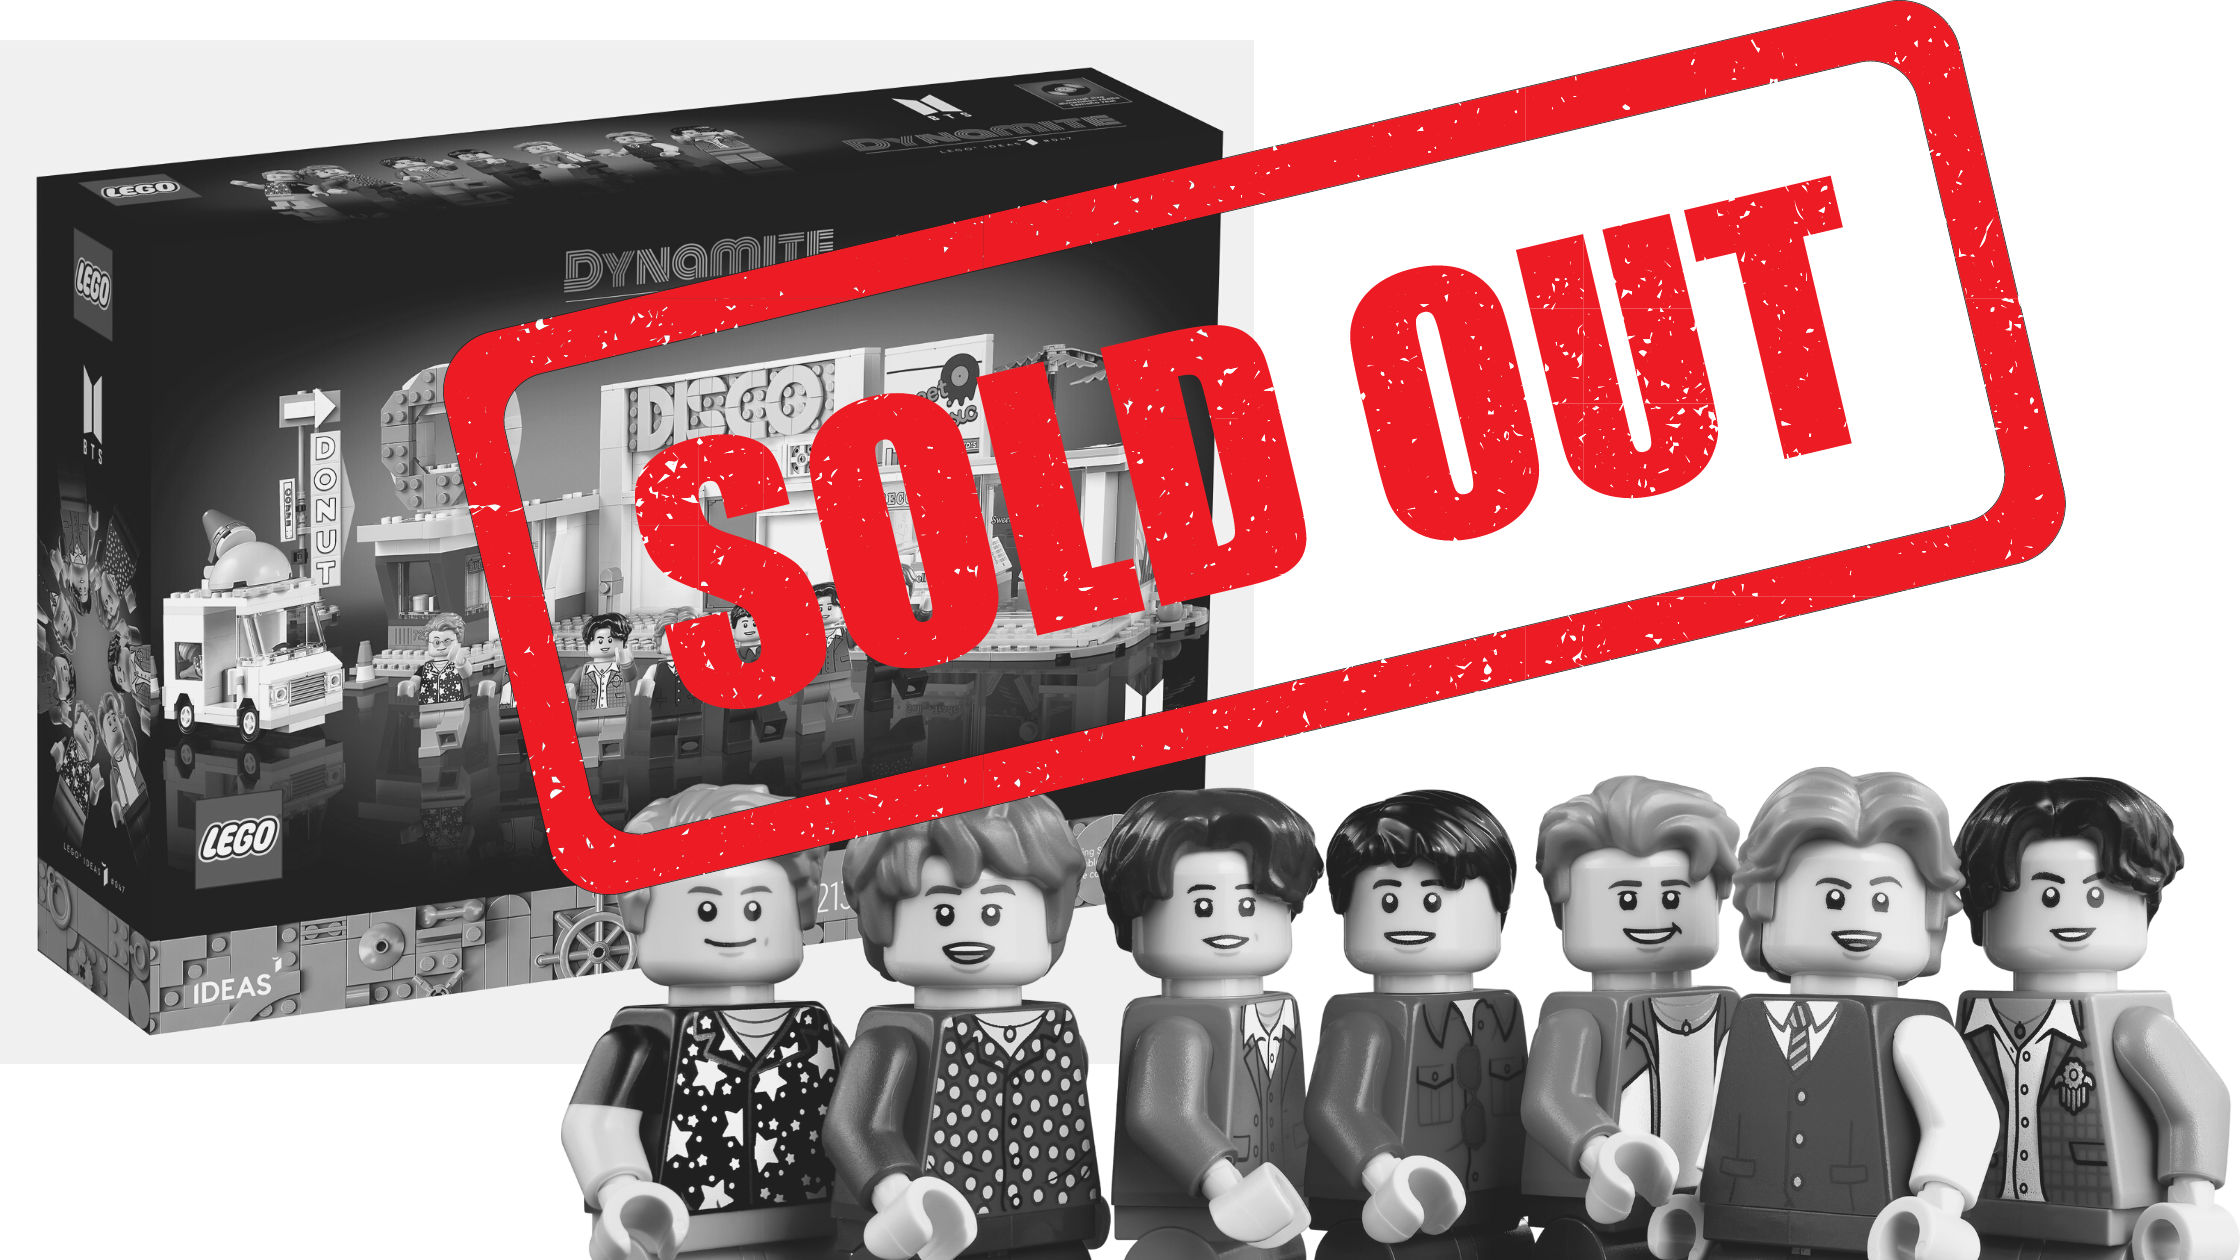 LEGO BTS Dynamite set sells out in record time, and scalpers are